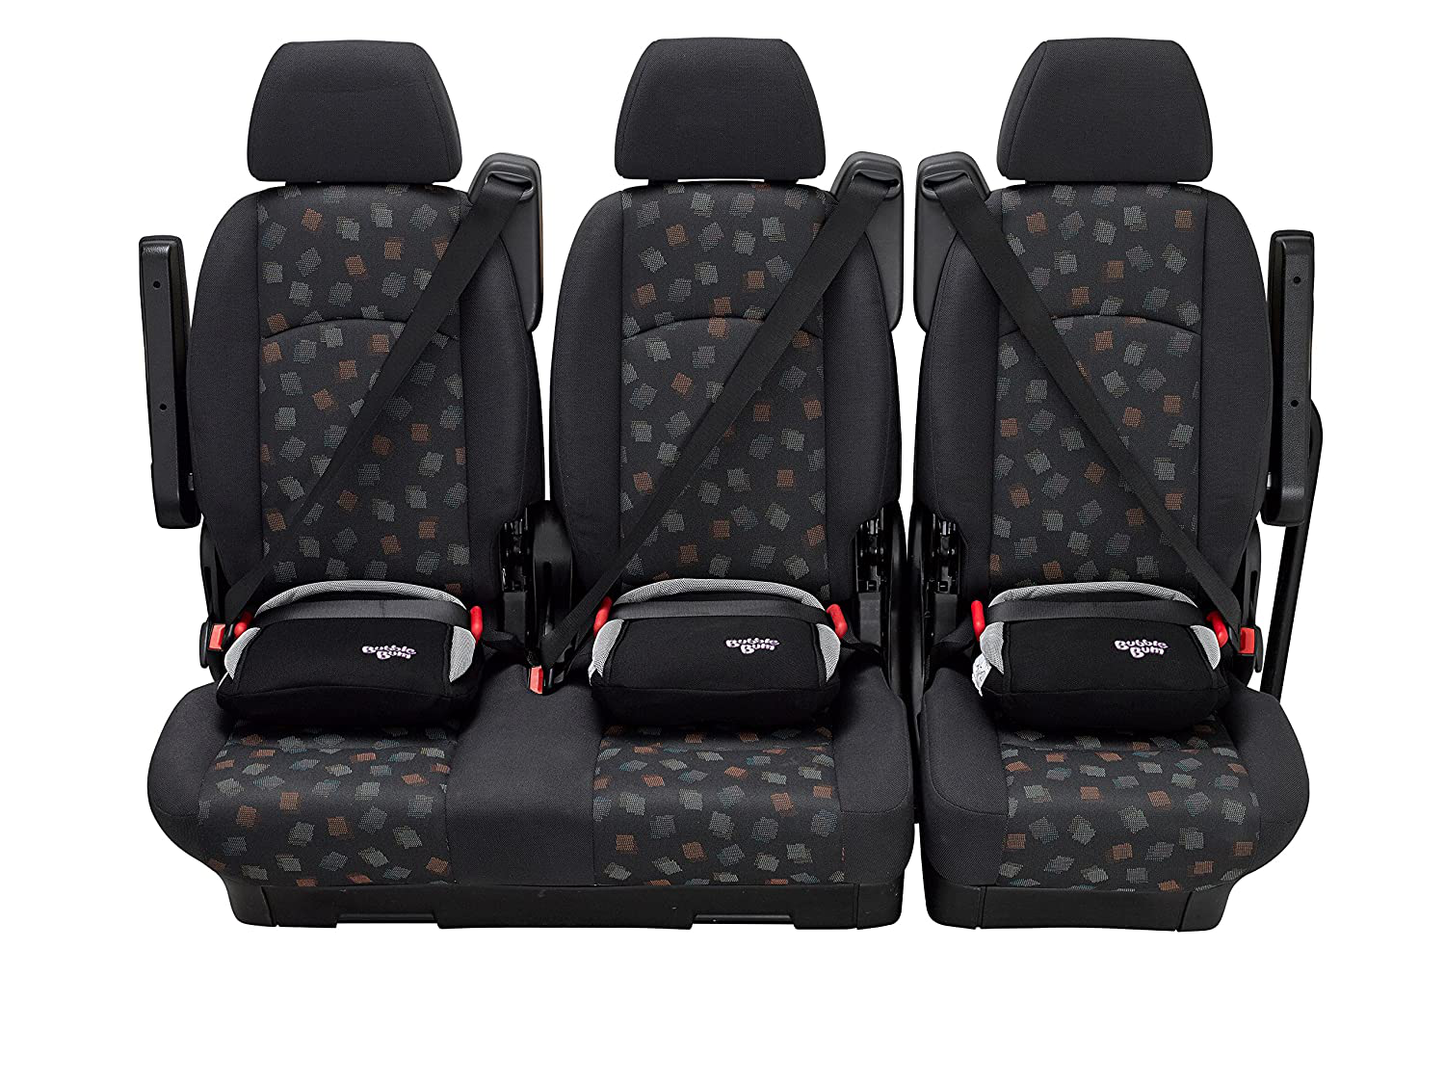 BubbleBum Inflatable Booster Car Seat - Narrow Travel Booster - Comfortable, Compact and Convenient - Perfect for Vacations, Carpooling and 3 Across